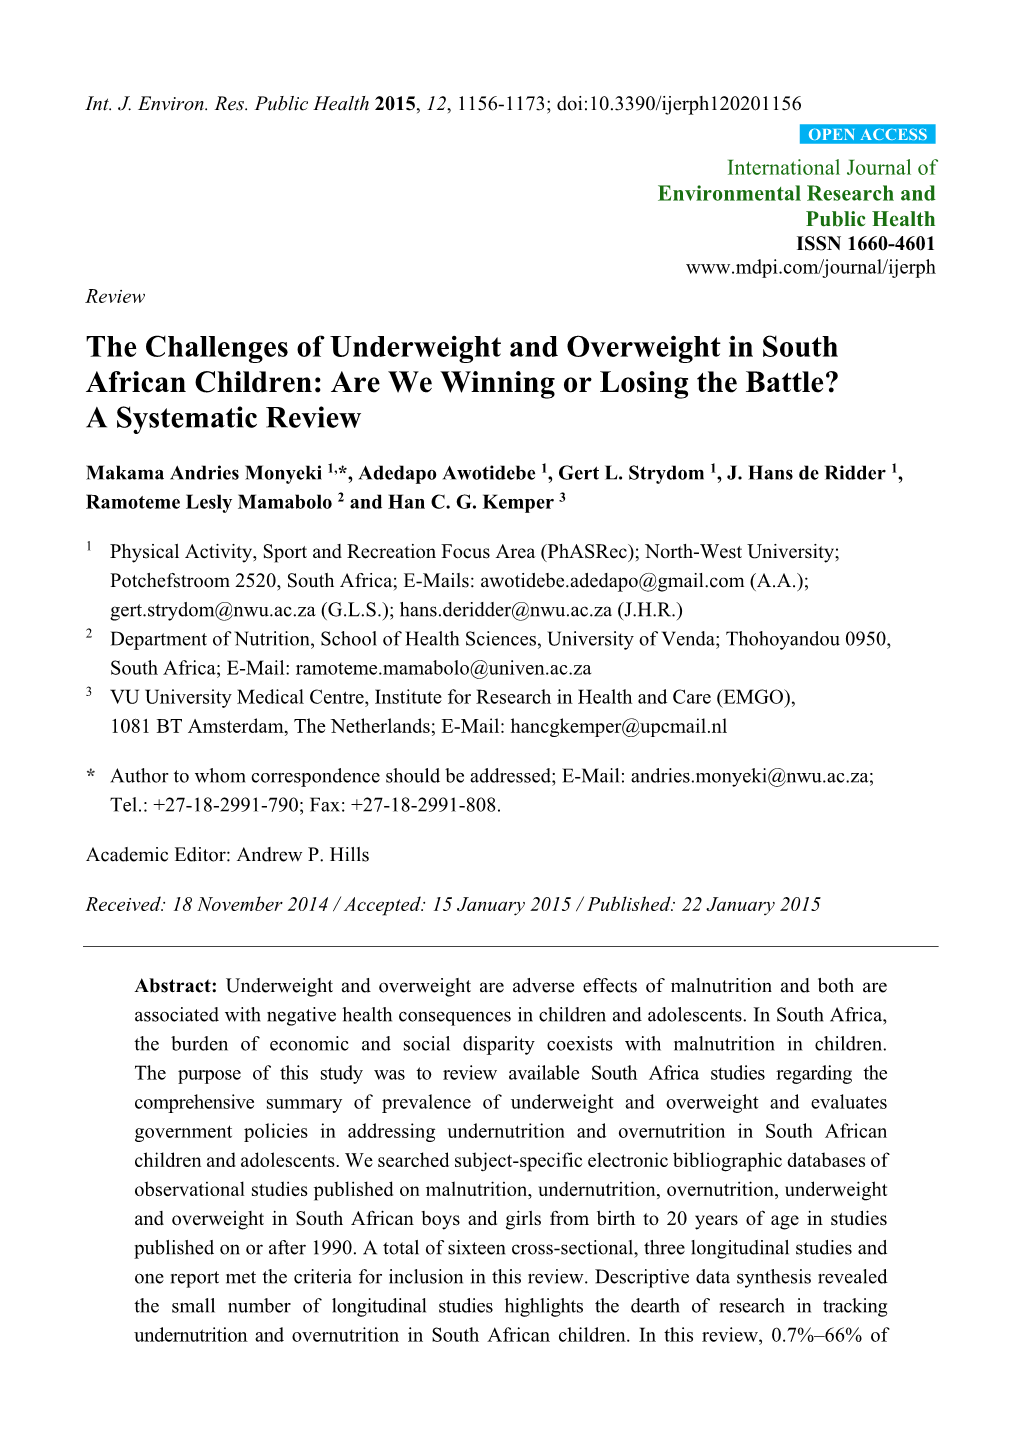 The Challenges of Underweight and Overweight in South African Children: Are We Winning Or Losing the Battle? a Systematic Review